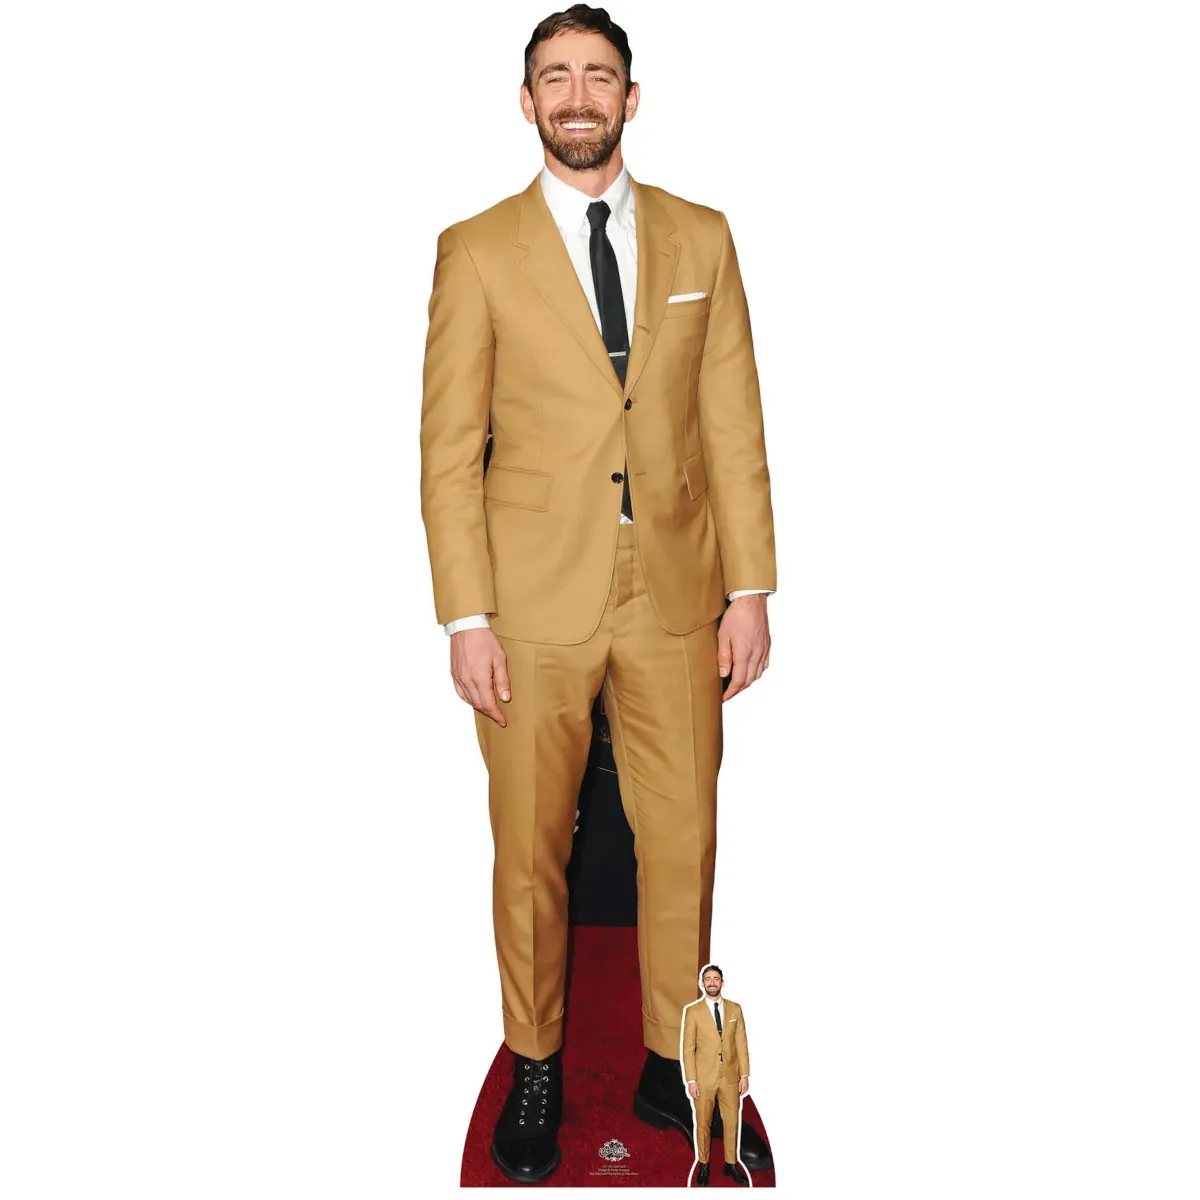 CS1109 Lee Pace 'Suit' (American Actor) Lifesize + Mini Cardboard Cutout Standee Front